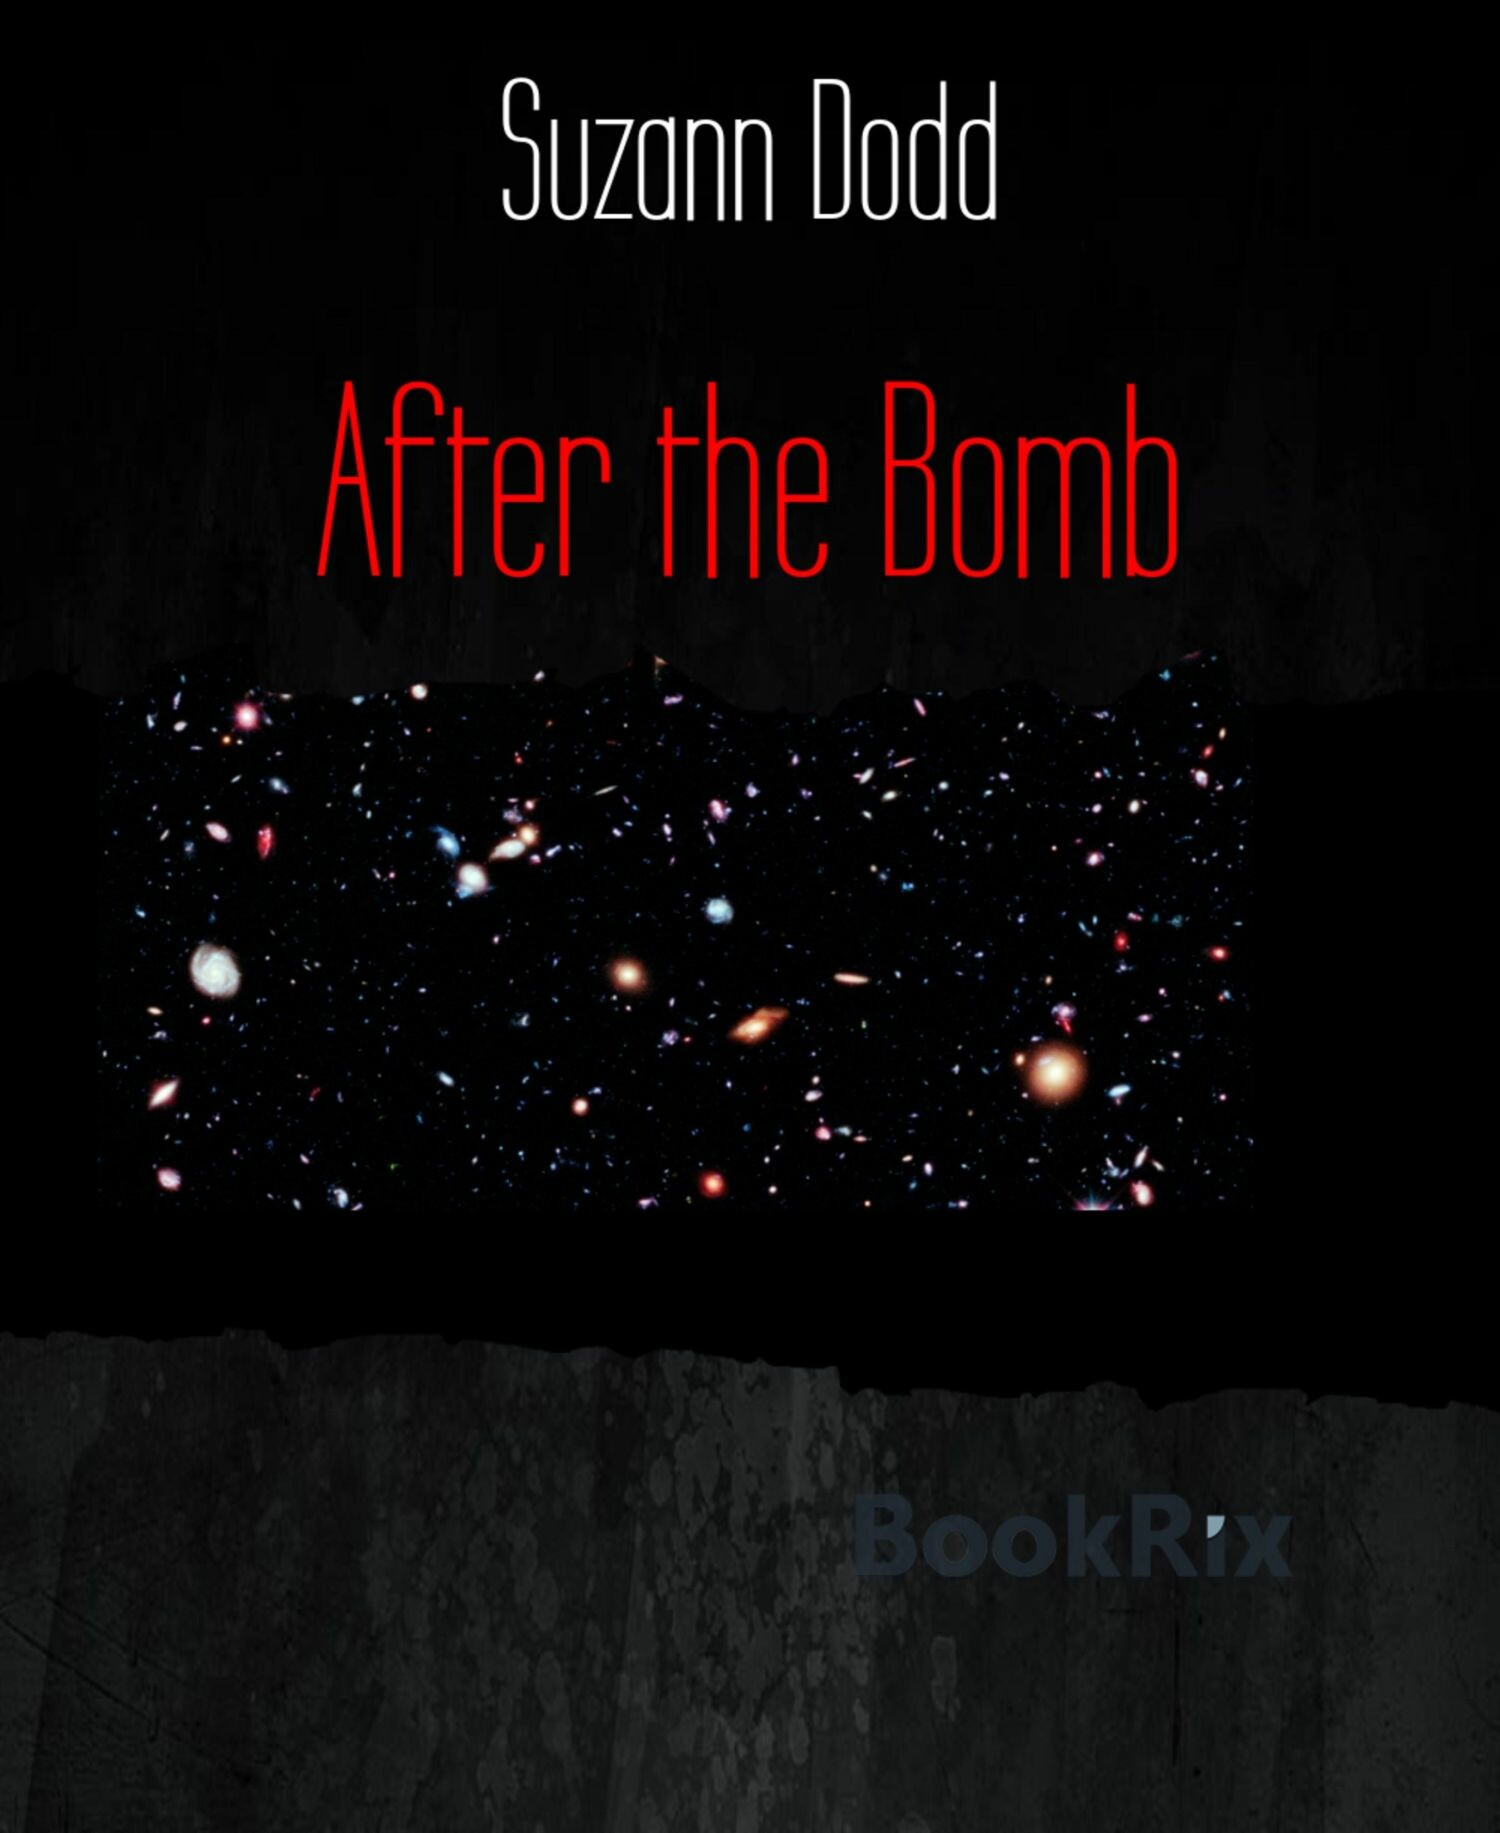 After the Bomb